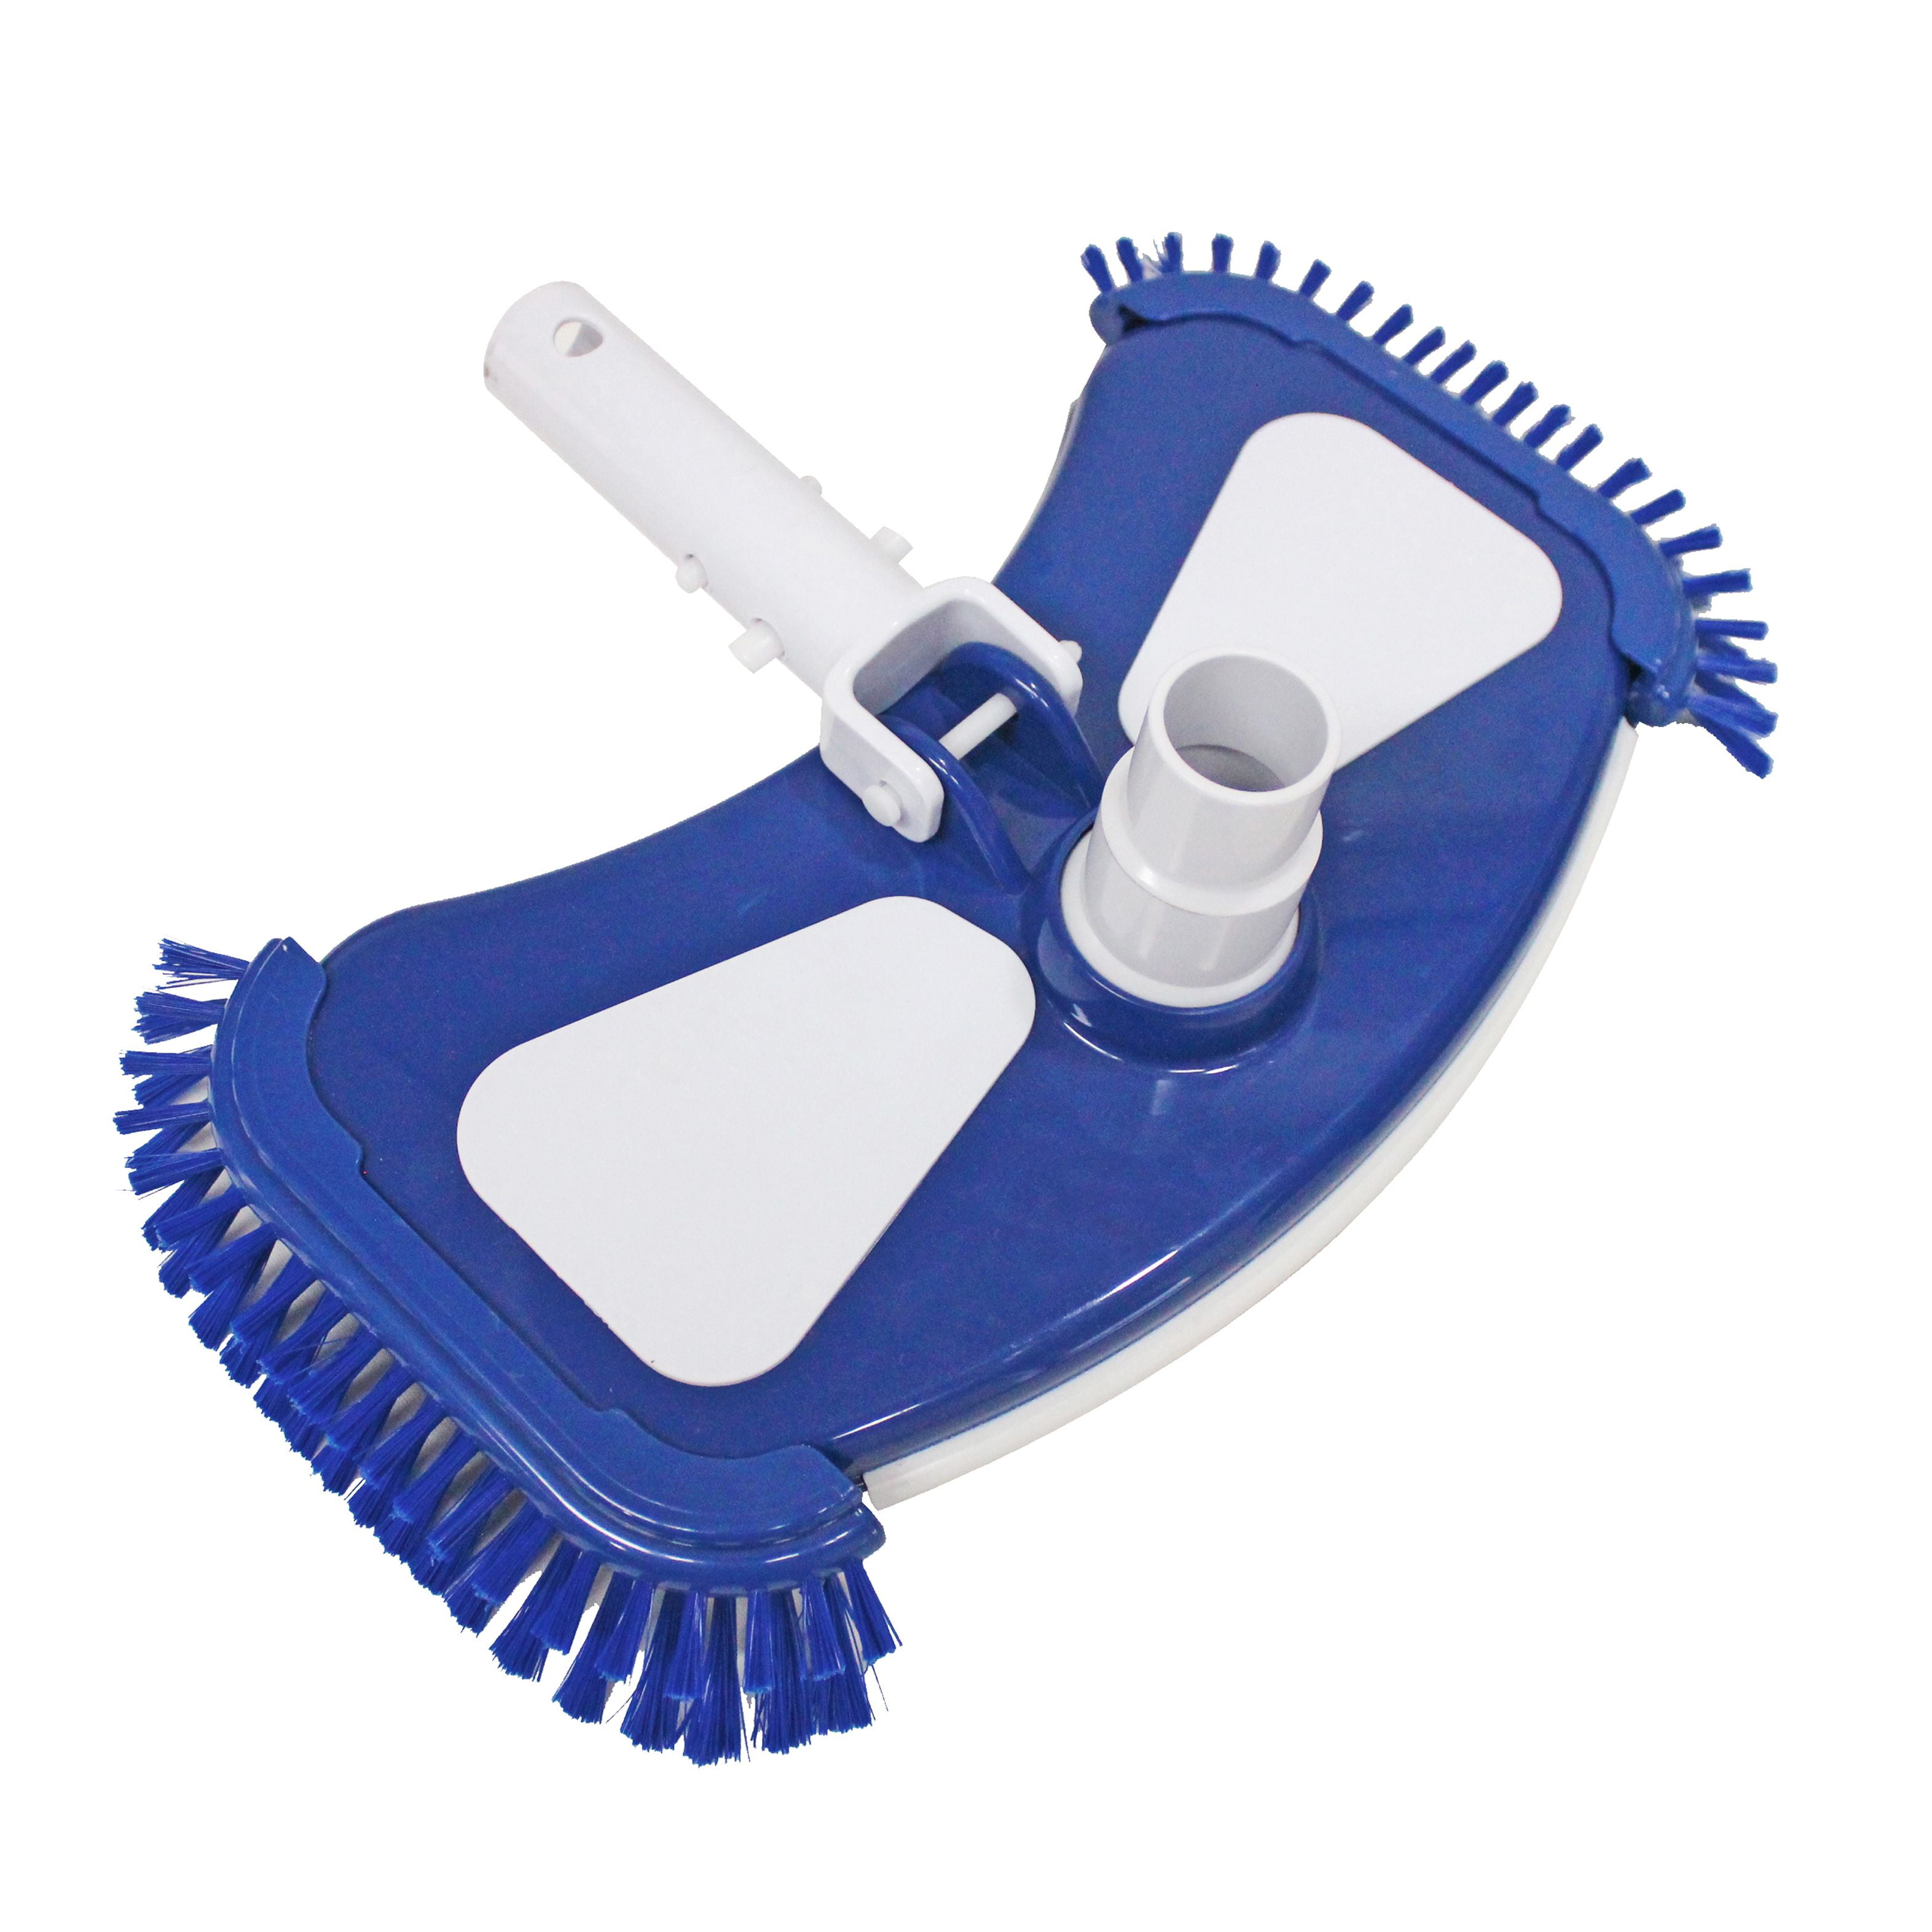 Mainstays 14.4in Pool Vacuum Head with Rotated Nozzle and Blue PP Bristles